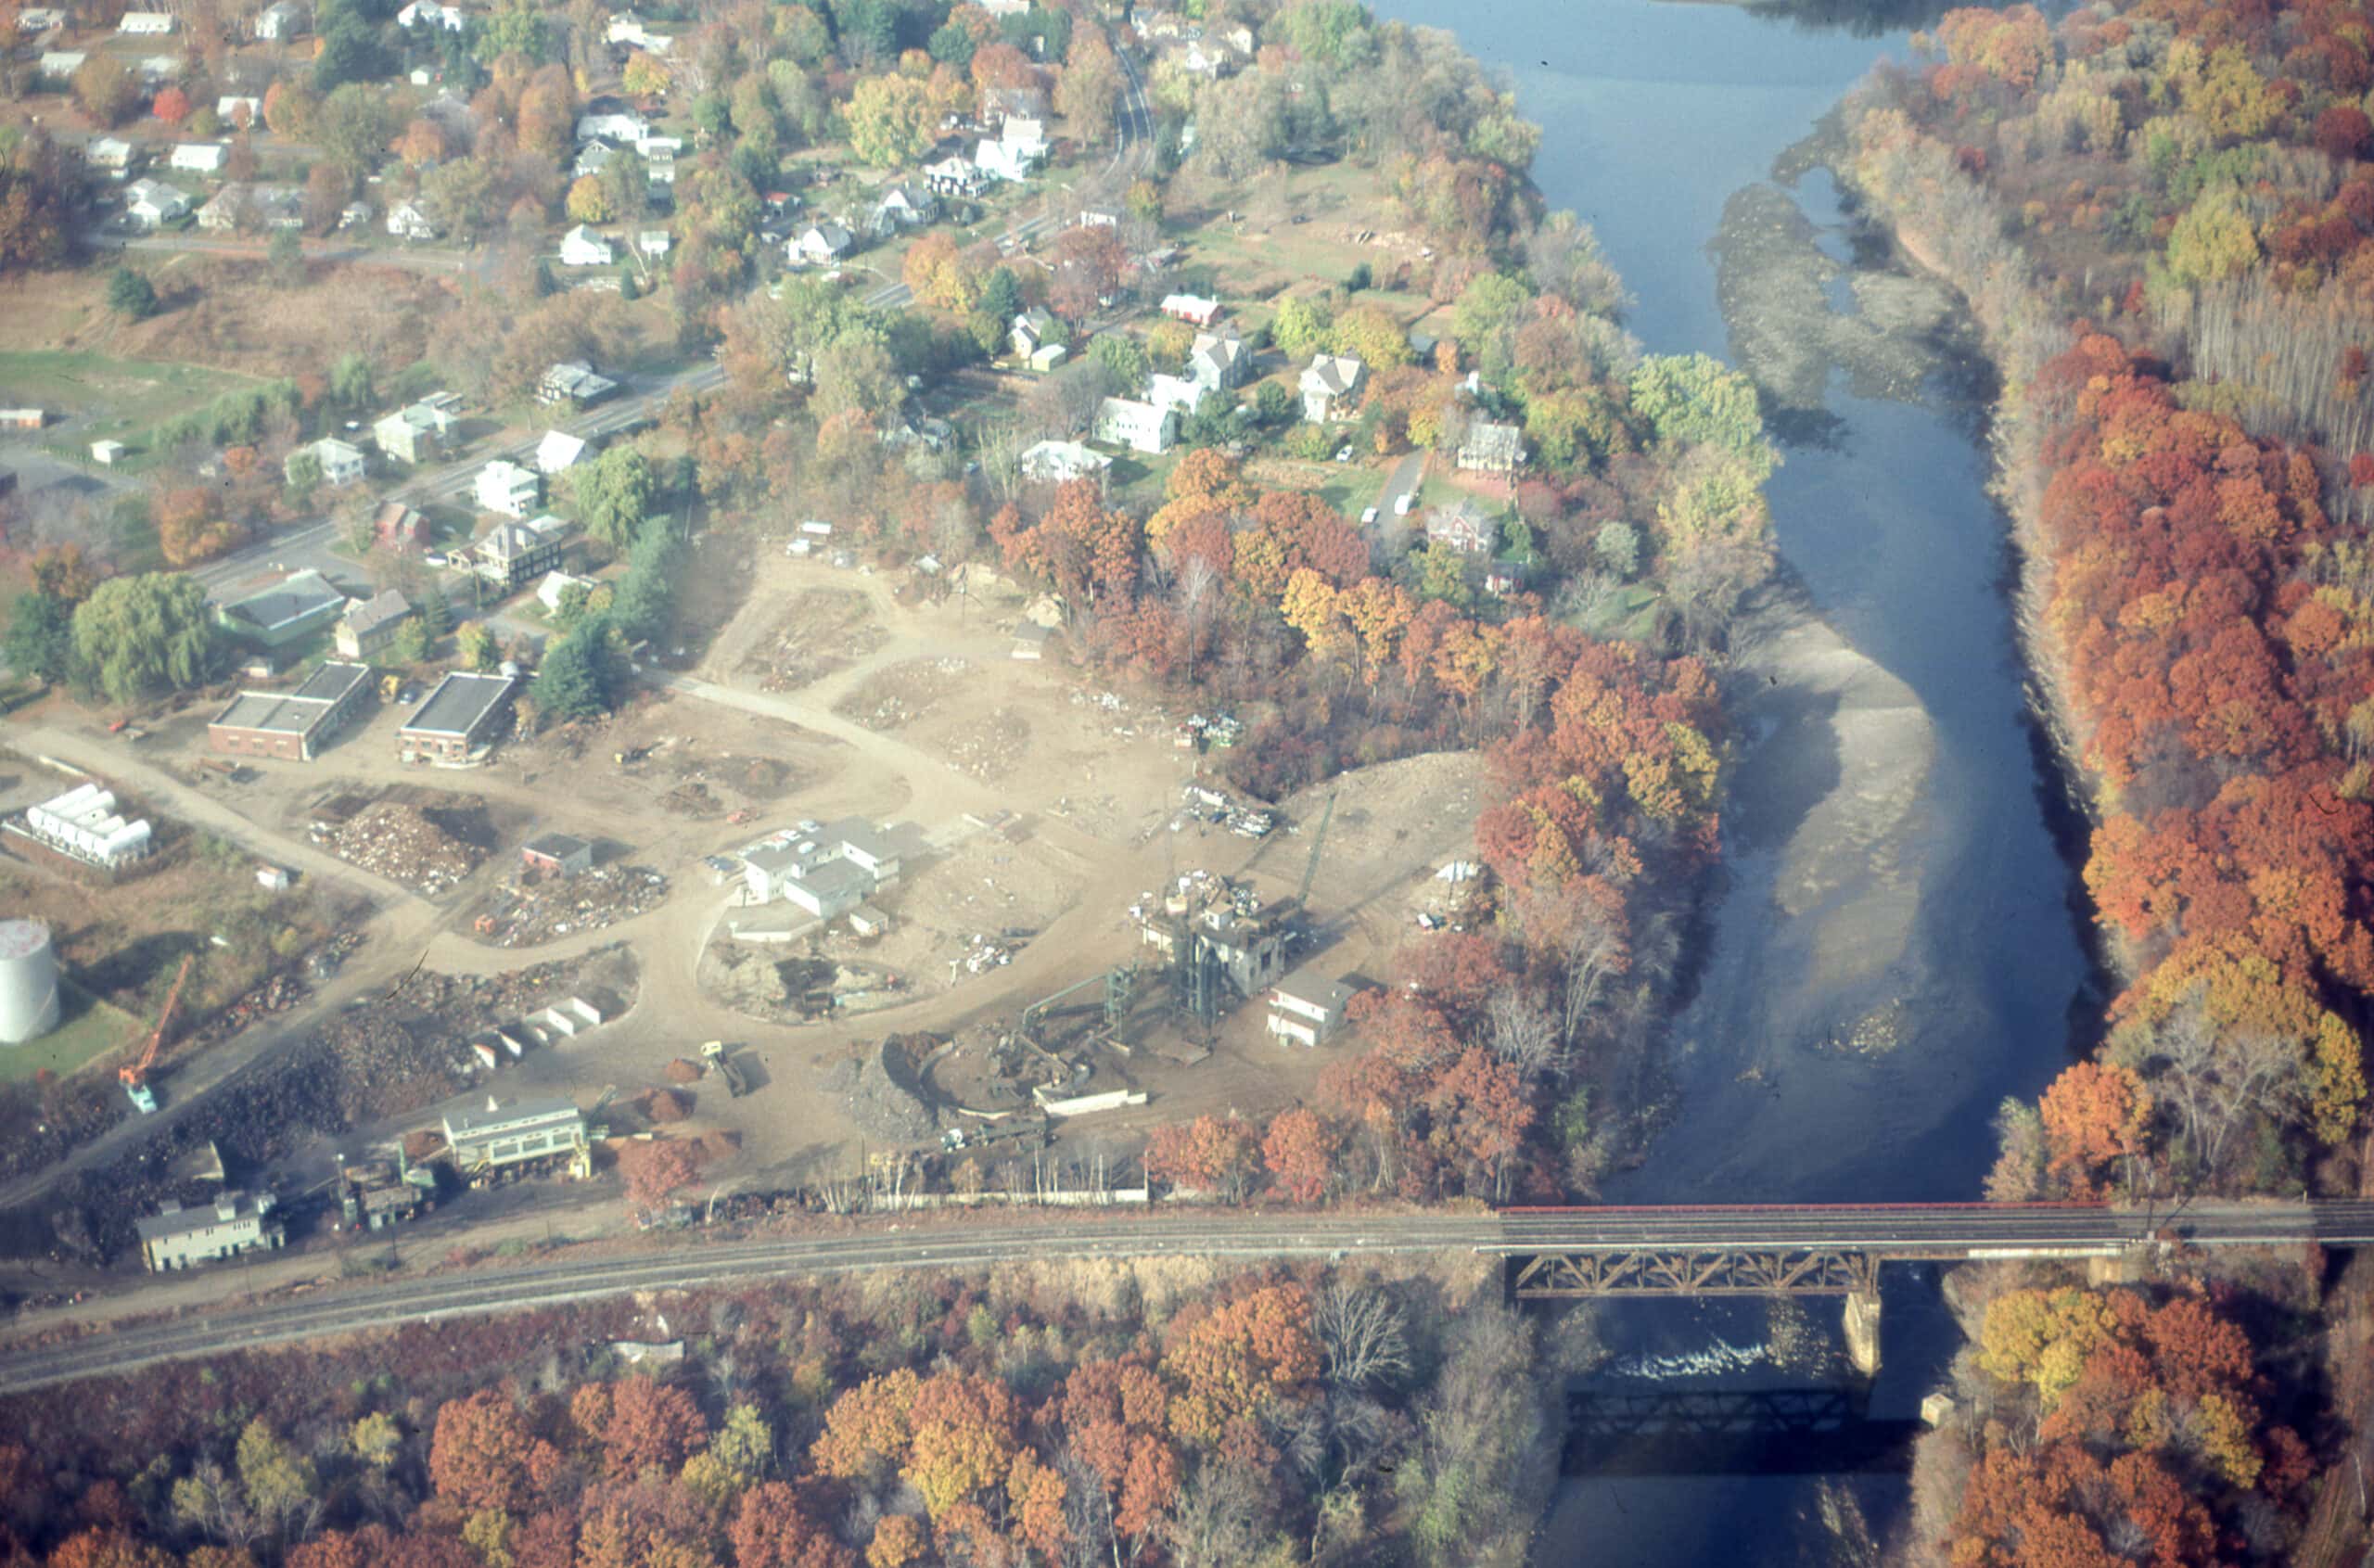 Aerial view of auto shredder and railroad bridge in Greenfield, 1982 by Massachusetts Dept. of Environmental Protection